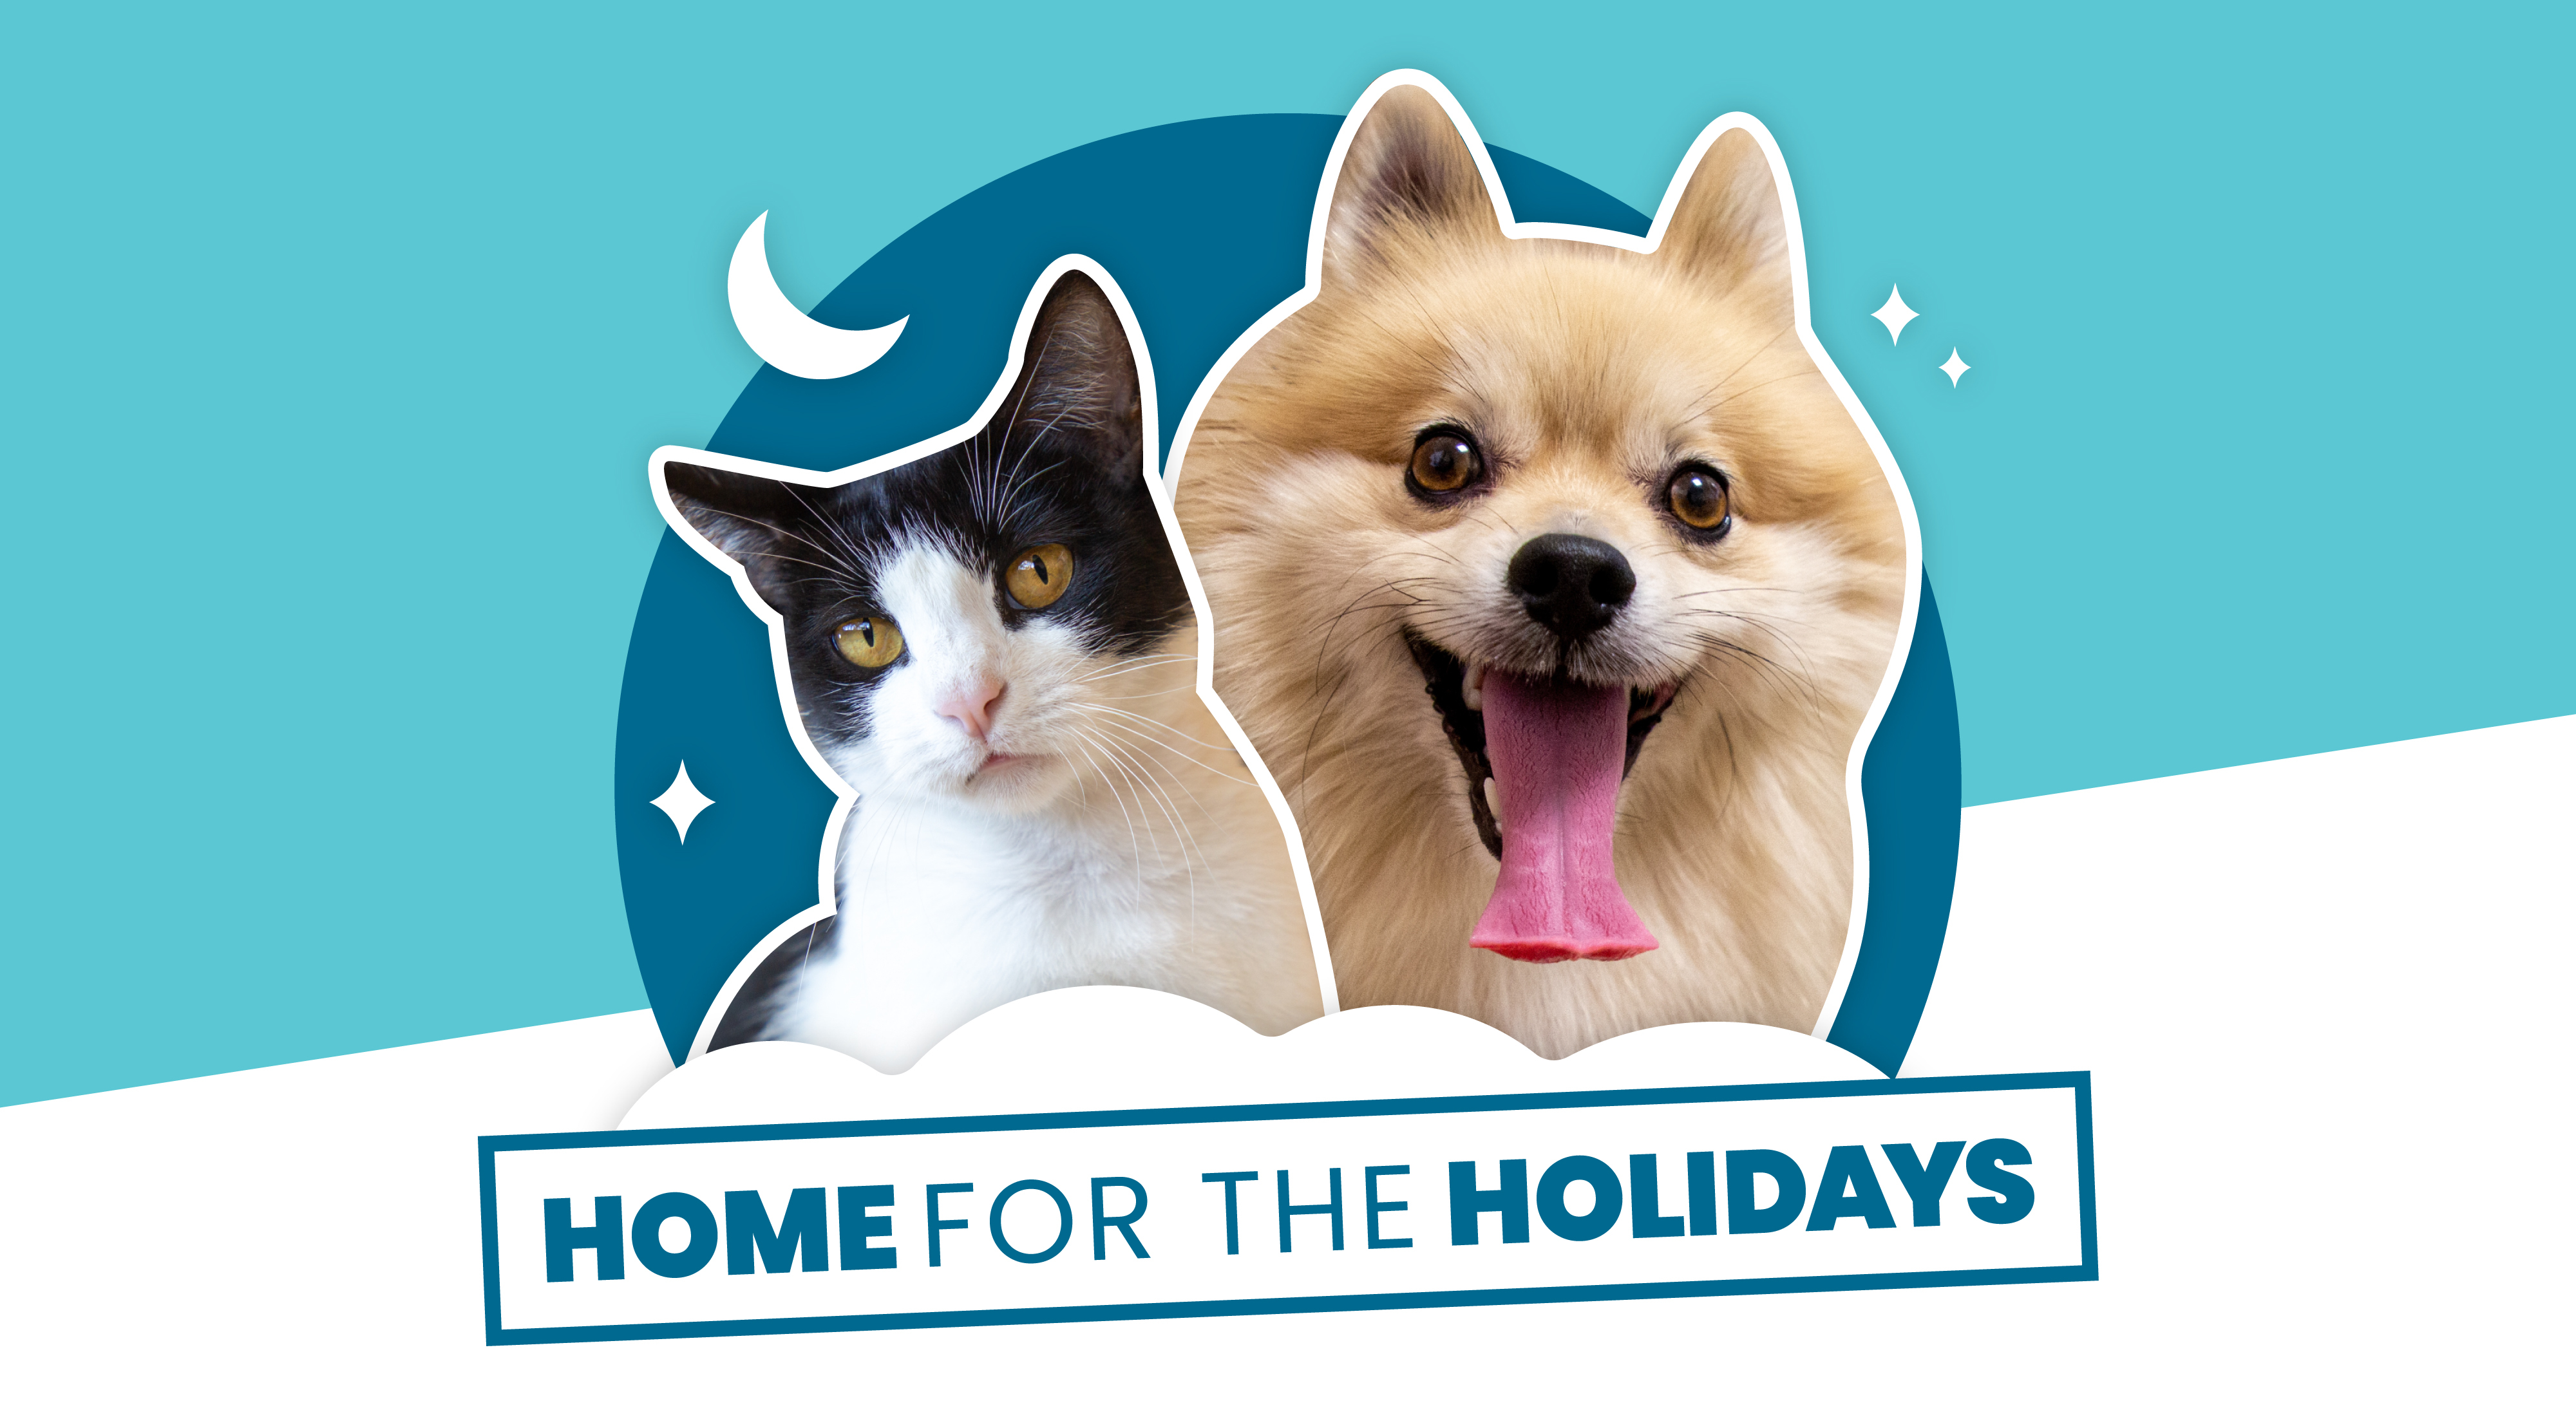 A black and white cat and excited Pomeranian encourage engagement with Home for the Holidays.